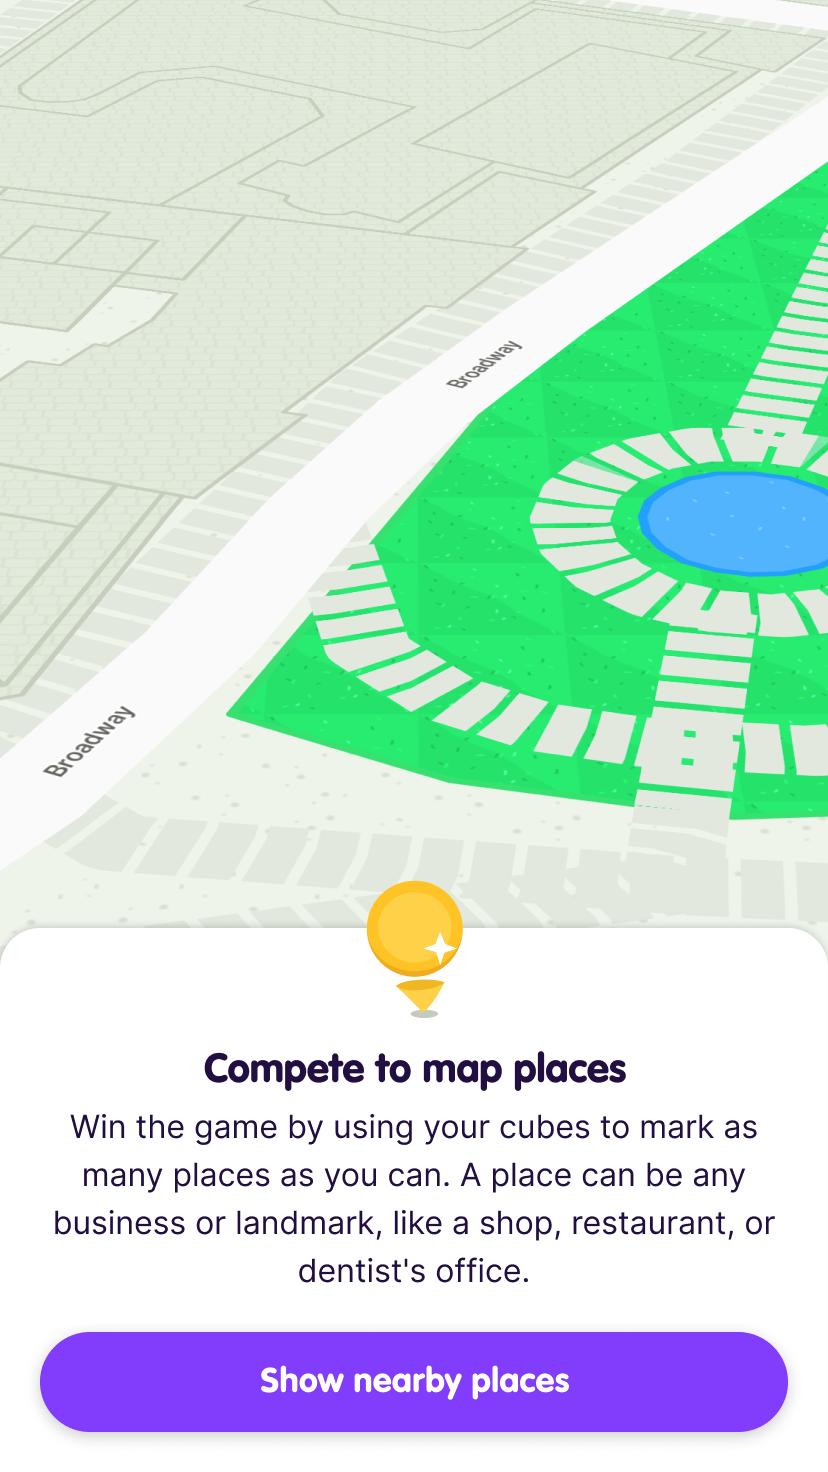 Screenshot from the app intro showing empty map and prompting the user to tap a button to Show nearby places.